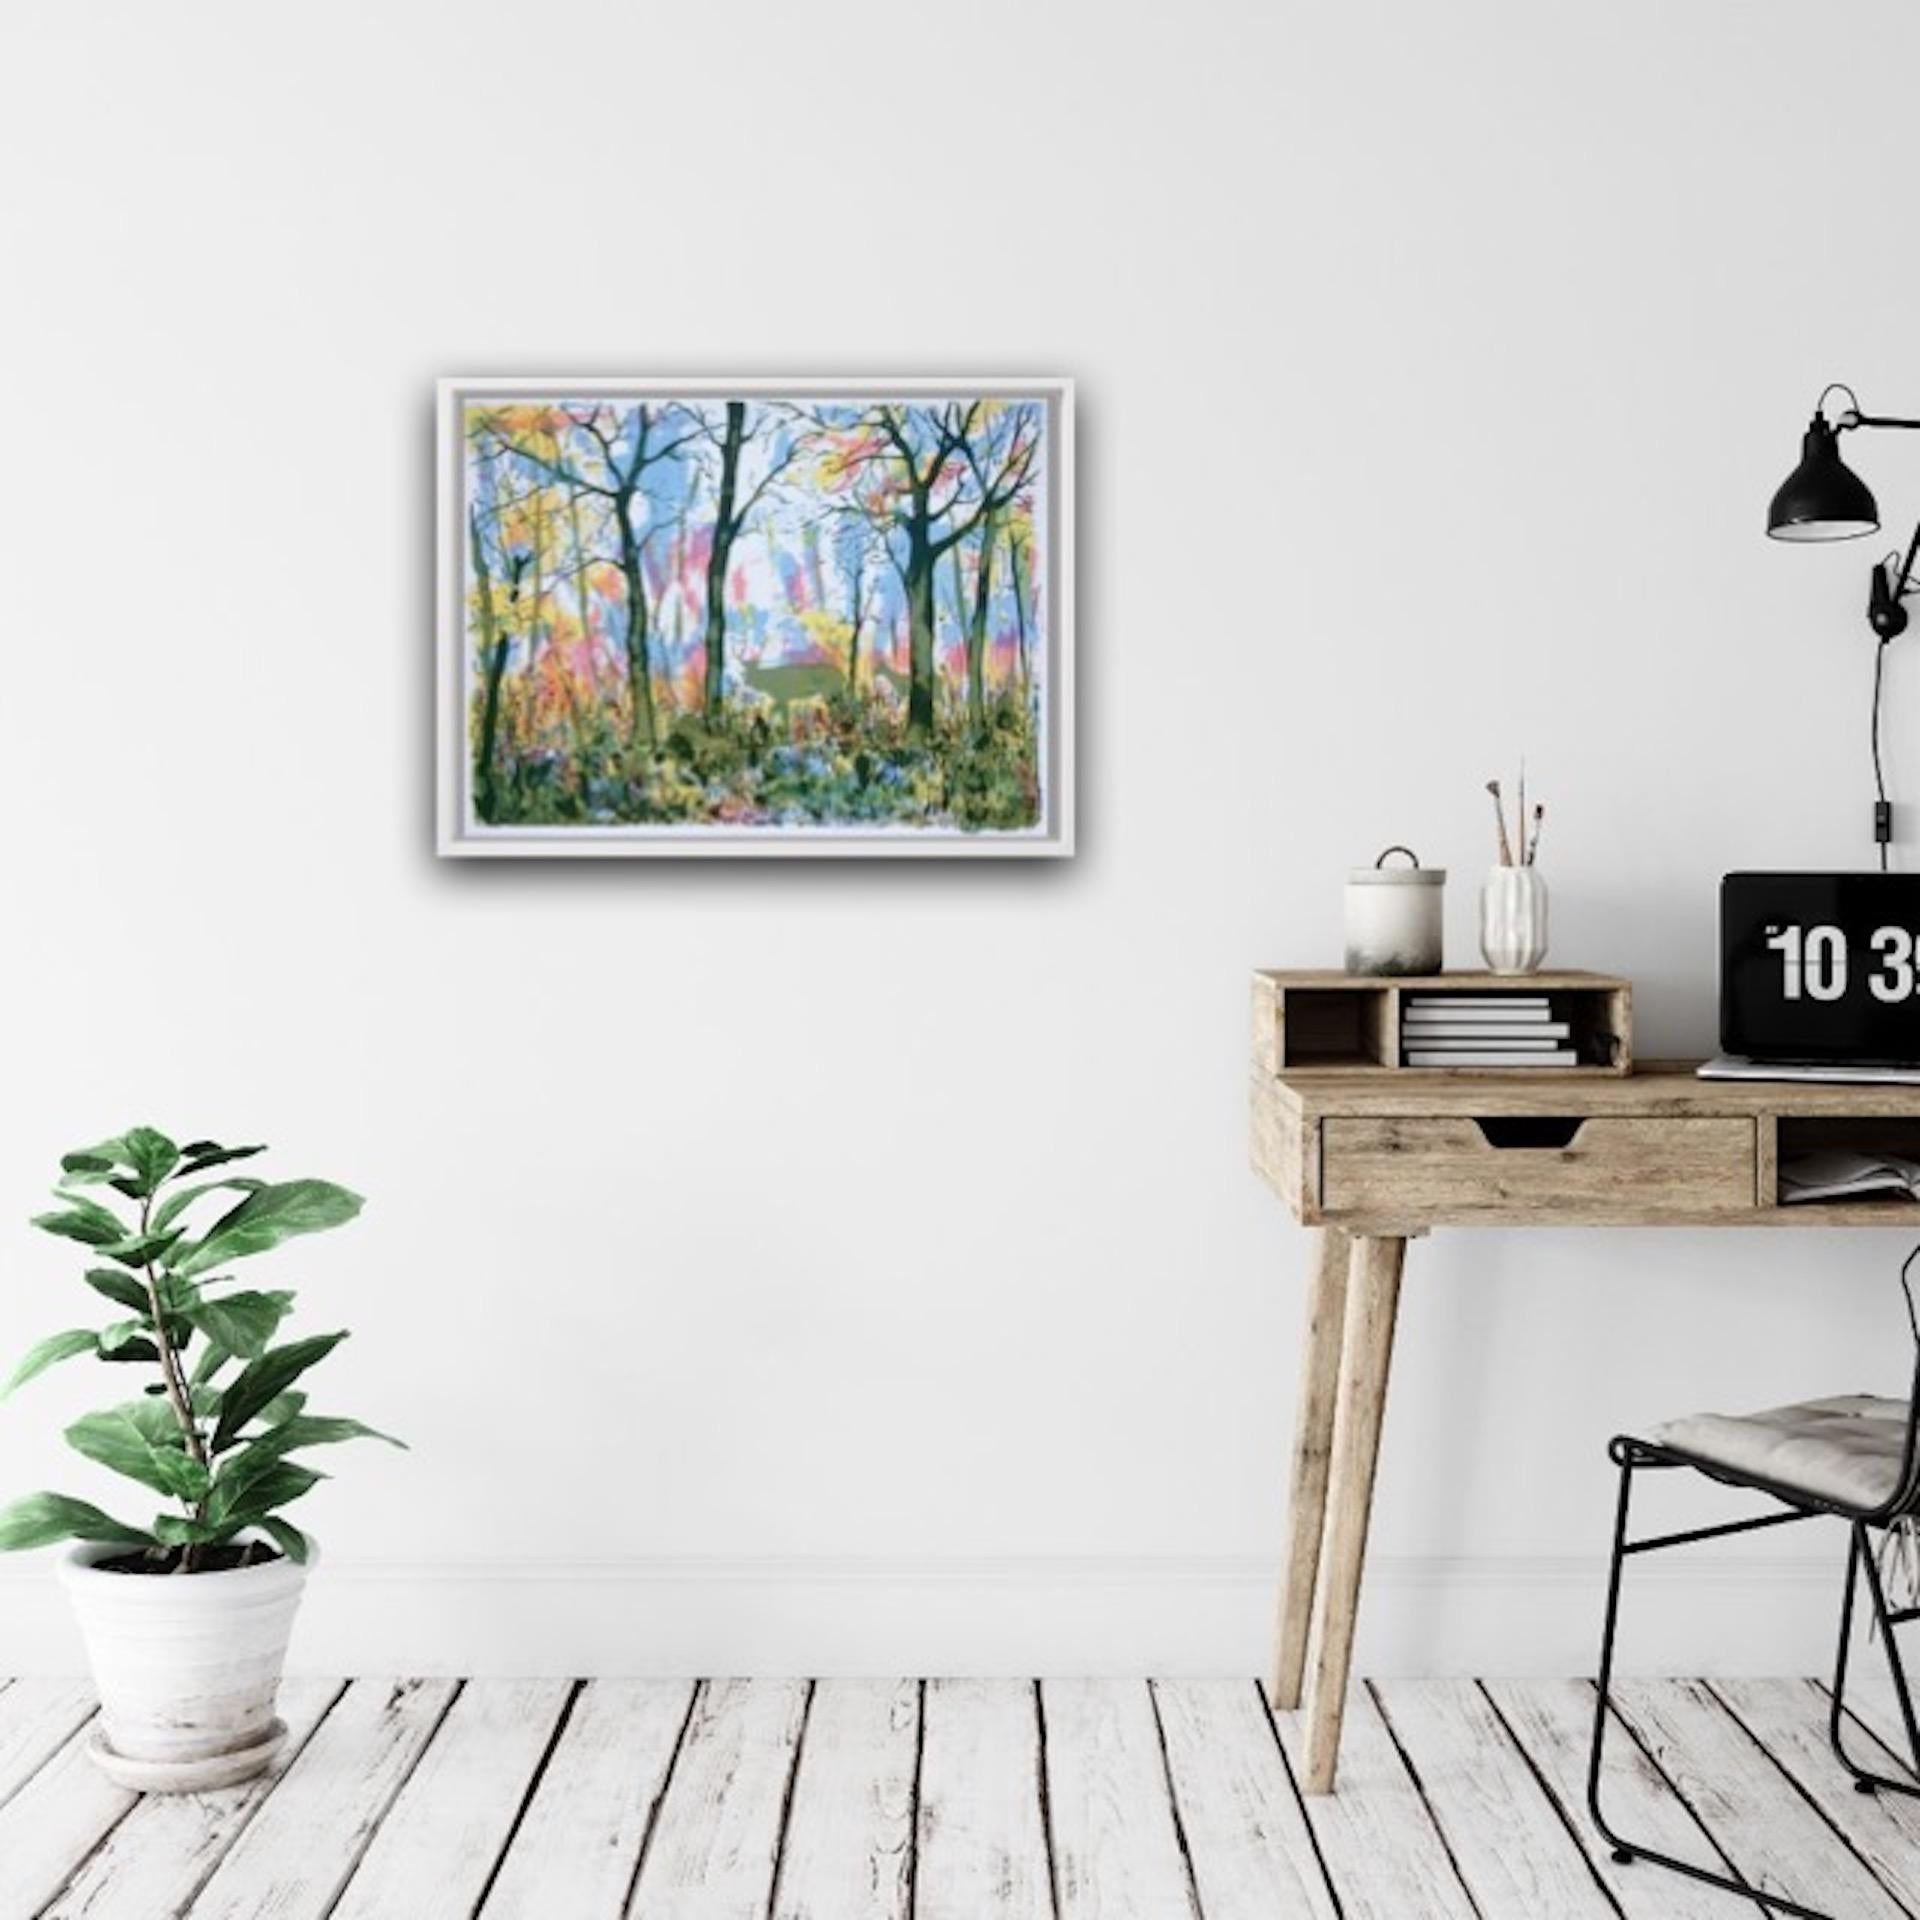 Tim Southall
Woodland Scene
Limited Edition 6 Colour Silkscreen Print
Edition of 25
Sheet Size: H 46cm x W 64cm x D 0.1cm
Sold Unframed
Please note that insitu images are purely an indication of how a piece may look.

Woodland Scene is a limited